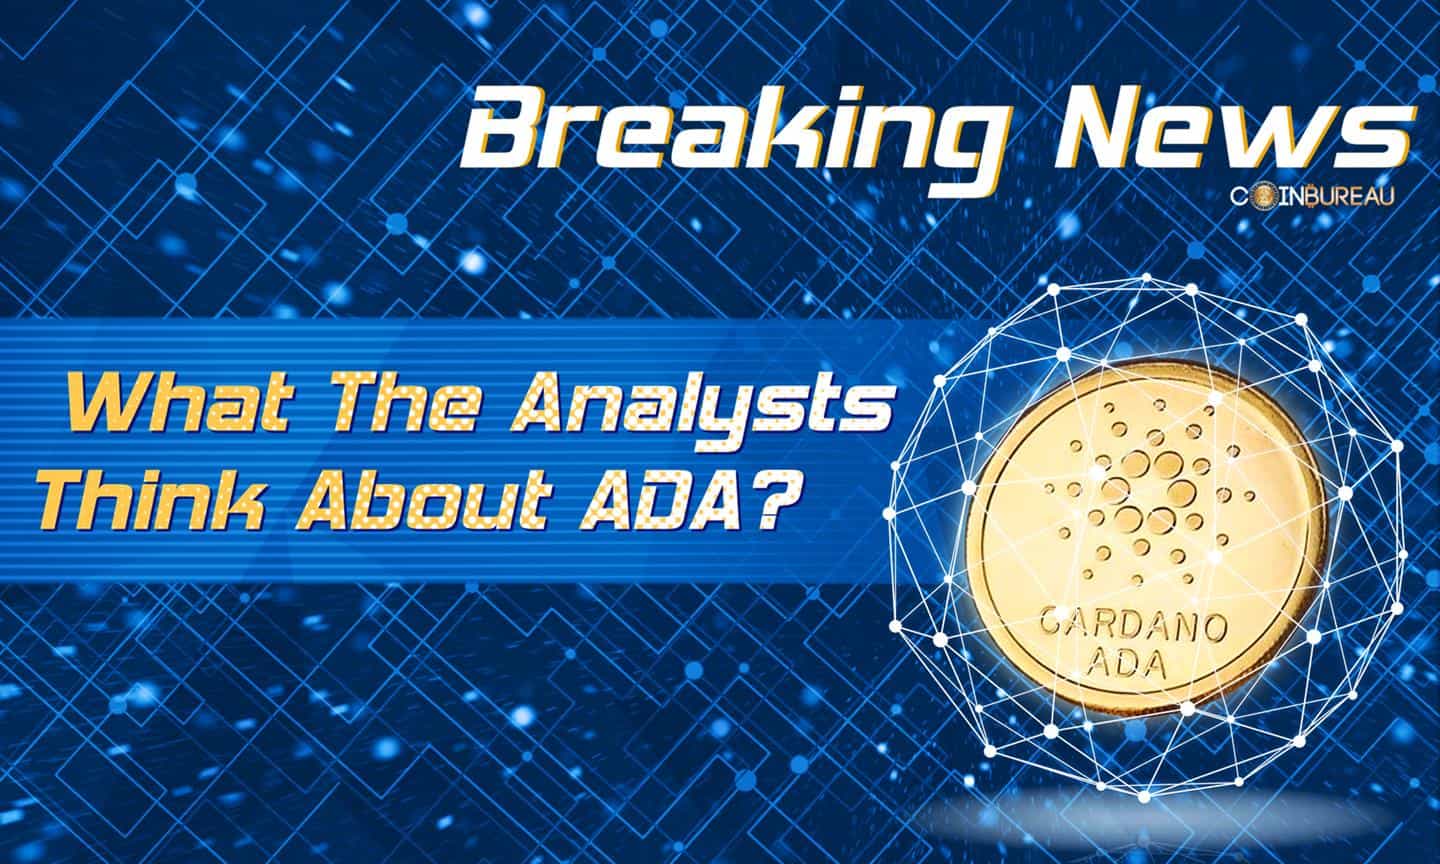 What The Analysts Think About ADA